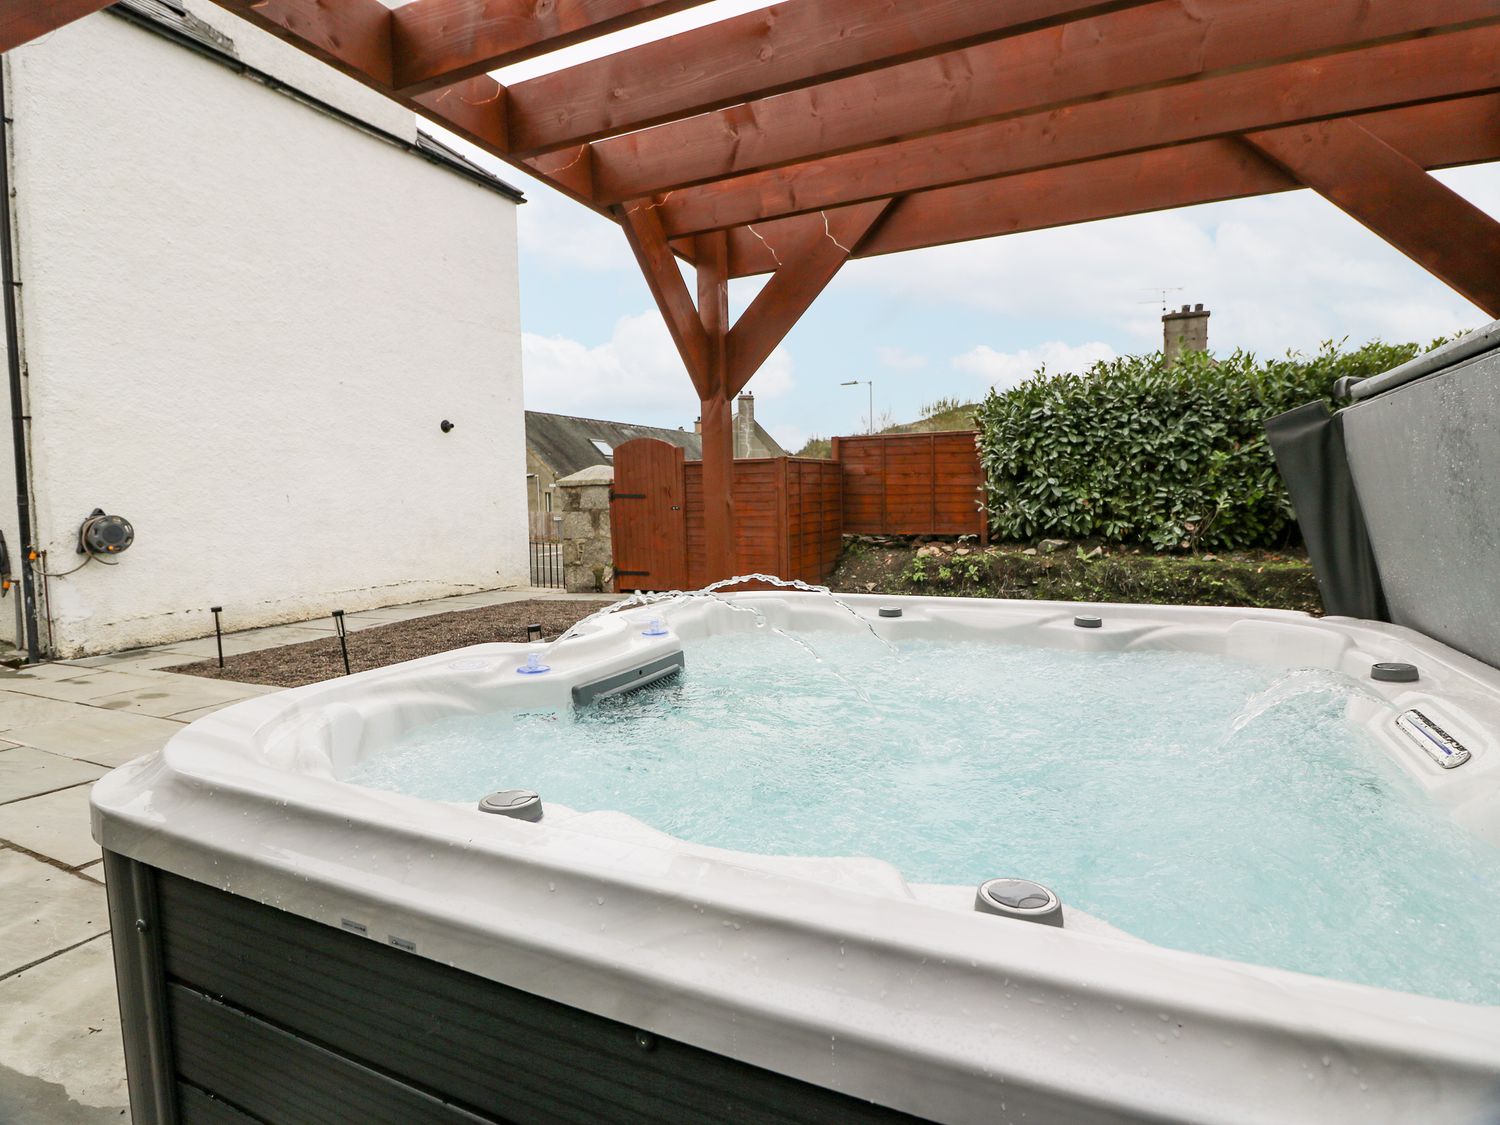 Fleetbank in Gatehouse of Fleet, Dumfries and Galloway. Four-bedroom home with hot tub. Contemporary